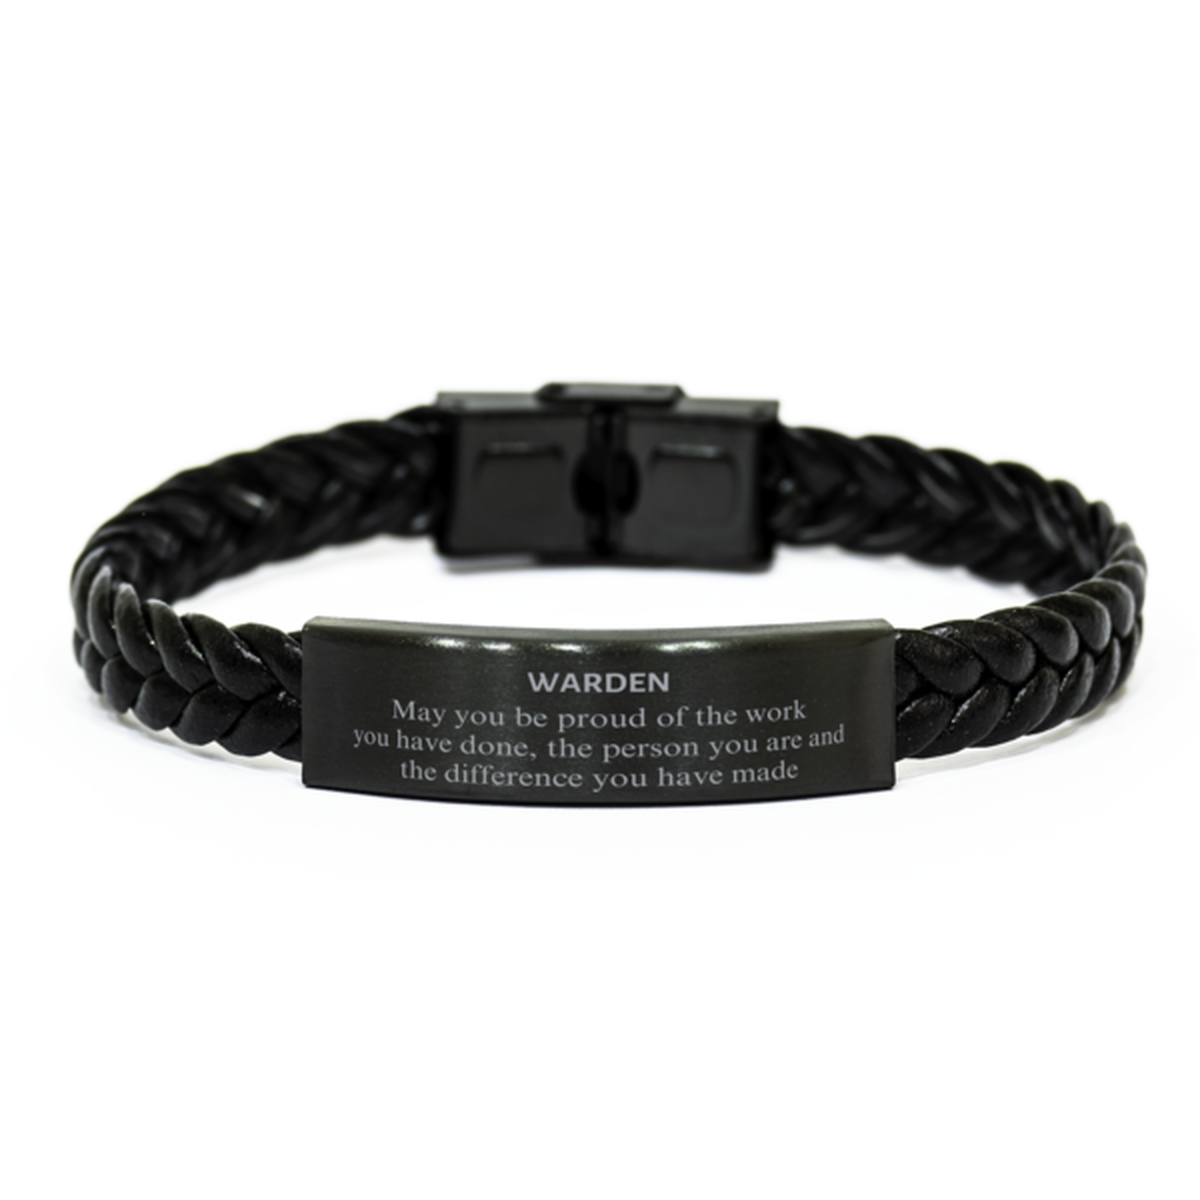 Warden May you be proud of the work you have done, Retirement Warden Braided Leather Bracelet for Colleague Appreciation Gifts Amazing for Warden